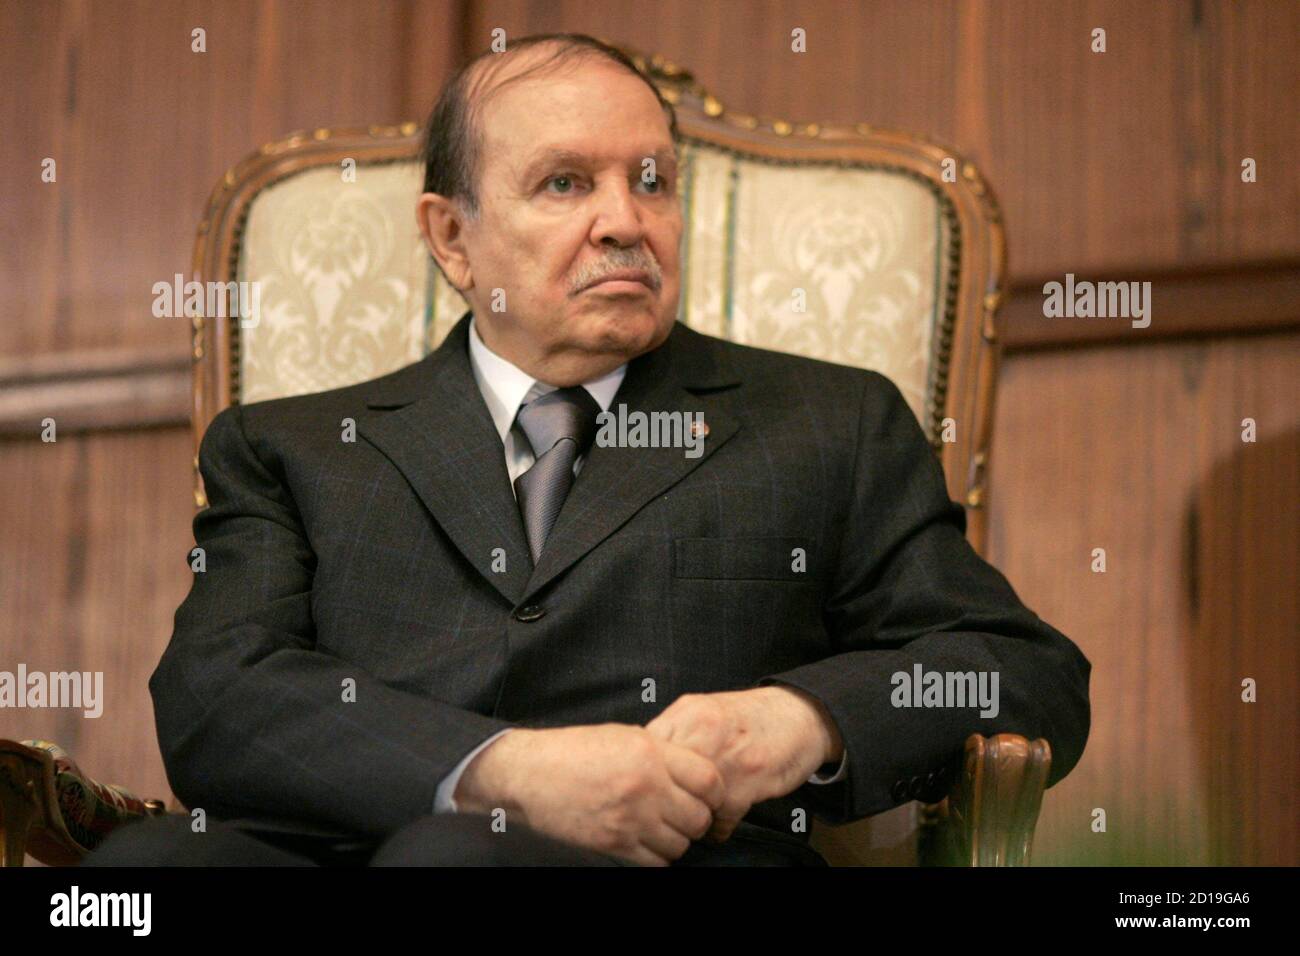 Algeria's President Abdelaziz Bouteflika attends the opening ceremony of the judiciary year at the supreme court in Algiers October 29, 2008. Bouteflika, reaching the end of his second and final term, said on Wednesday he wanted to alter Algeria's constitution in a manner several analysts interpreted as meaning he intends to stay on.    REUTERS/Louafi Larbi (ALGERIA) Stock Photo